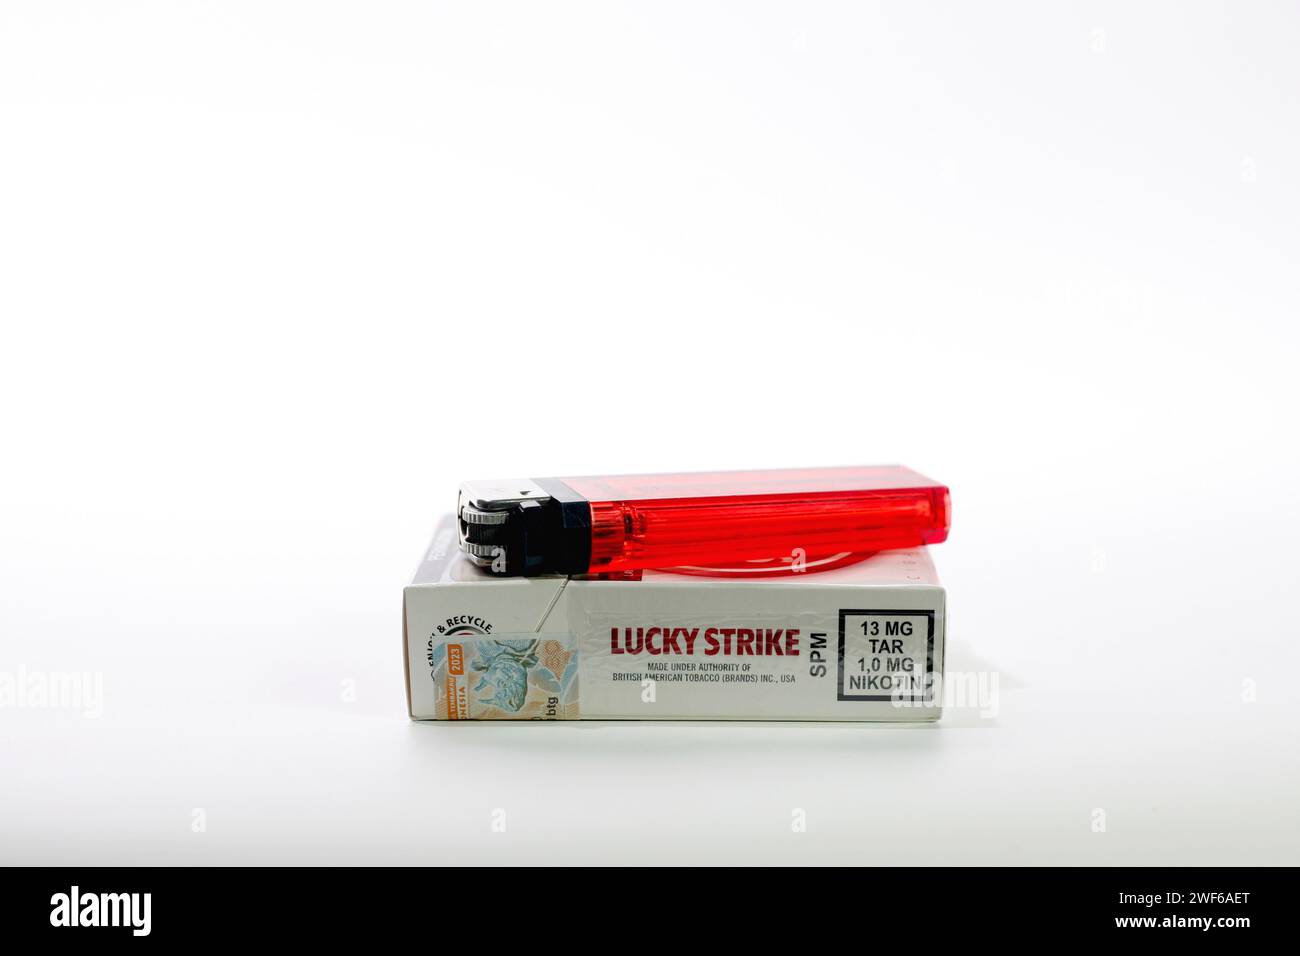 Packs of British American Tobacco Lucky Strike cigarettes with red lighter  isolated on white background Stock Photo